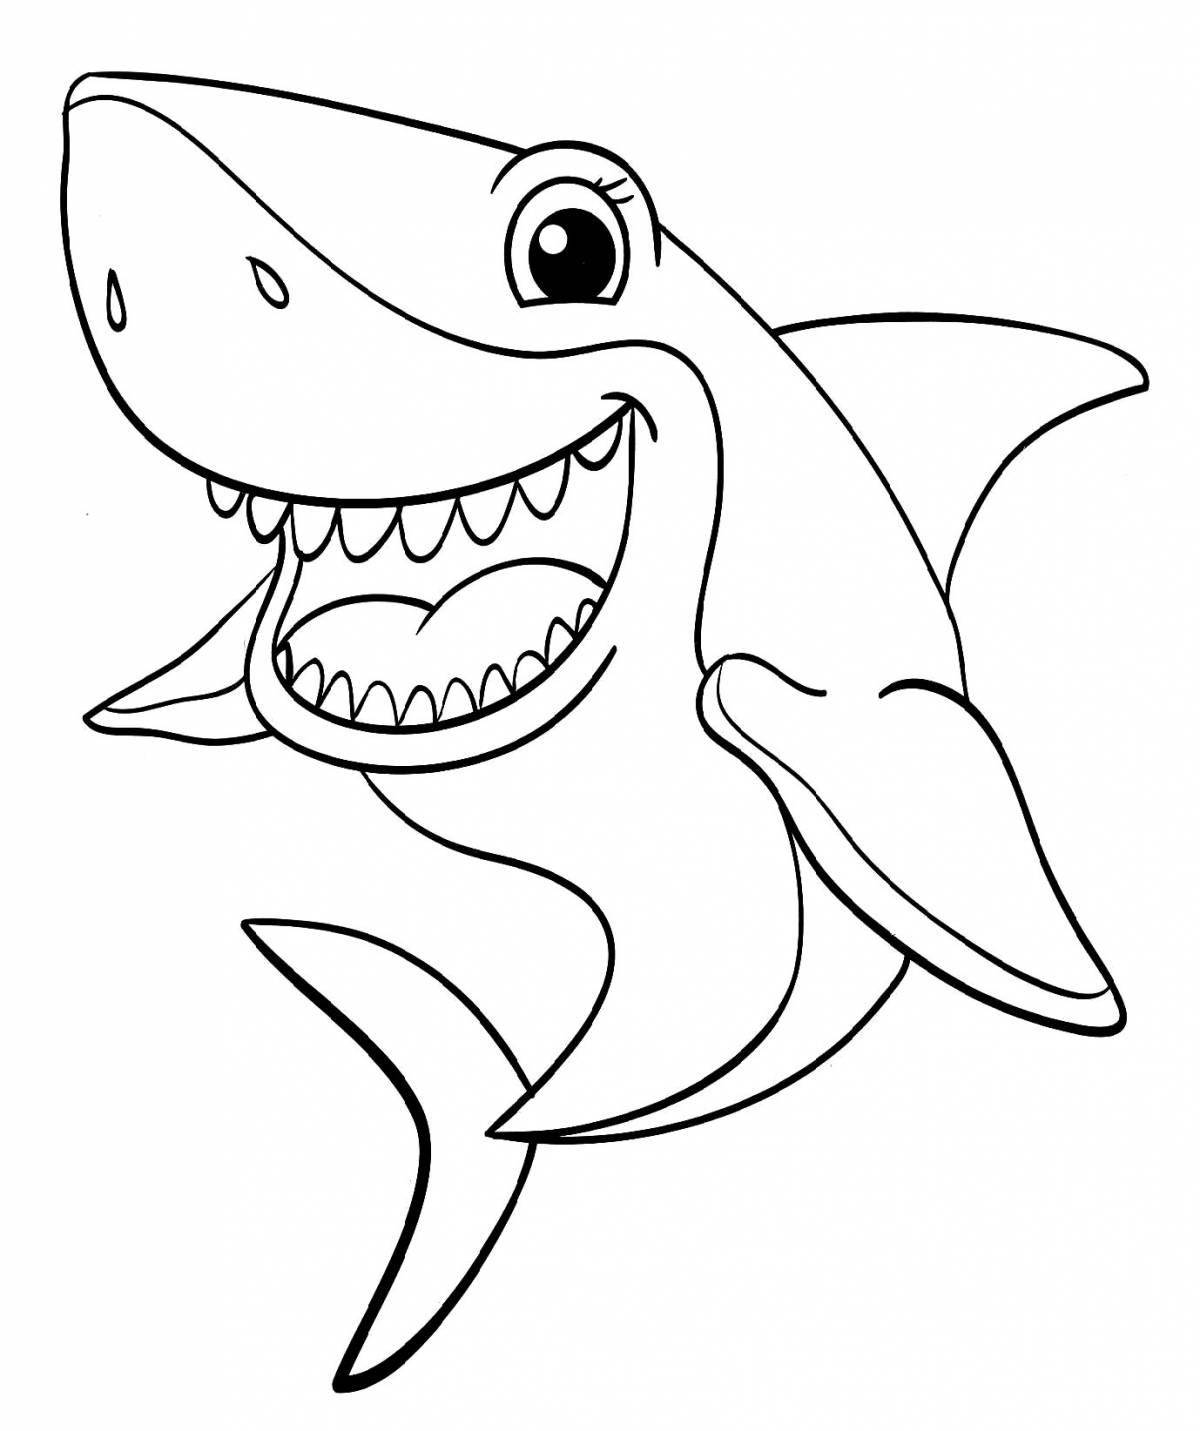 Charming shark coloring book for 4-5 year olds